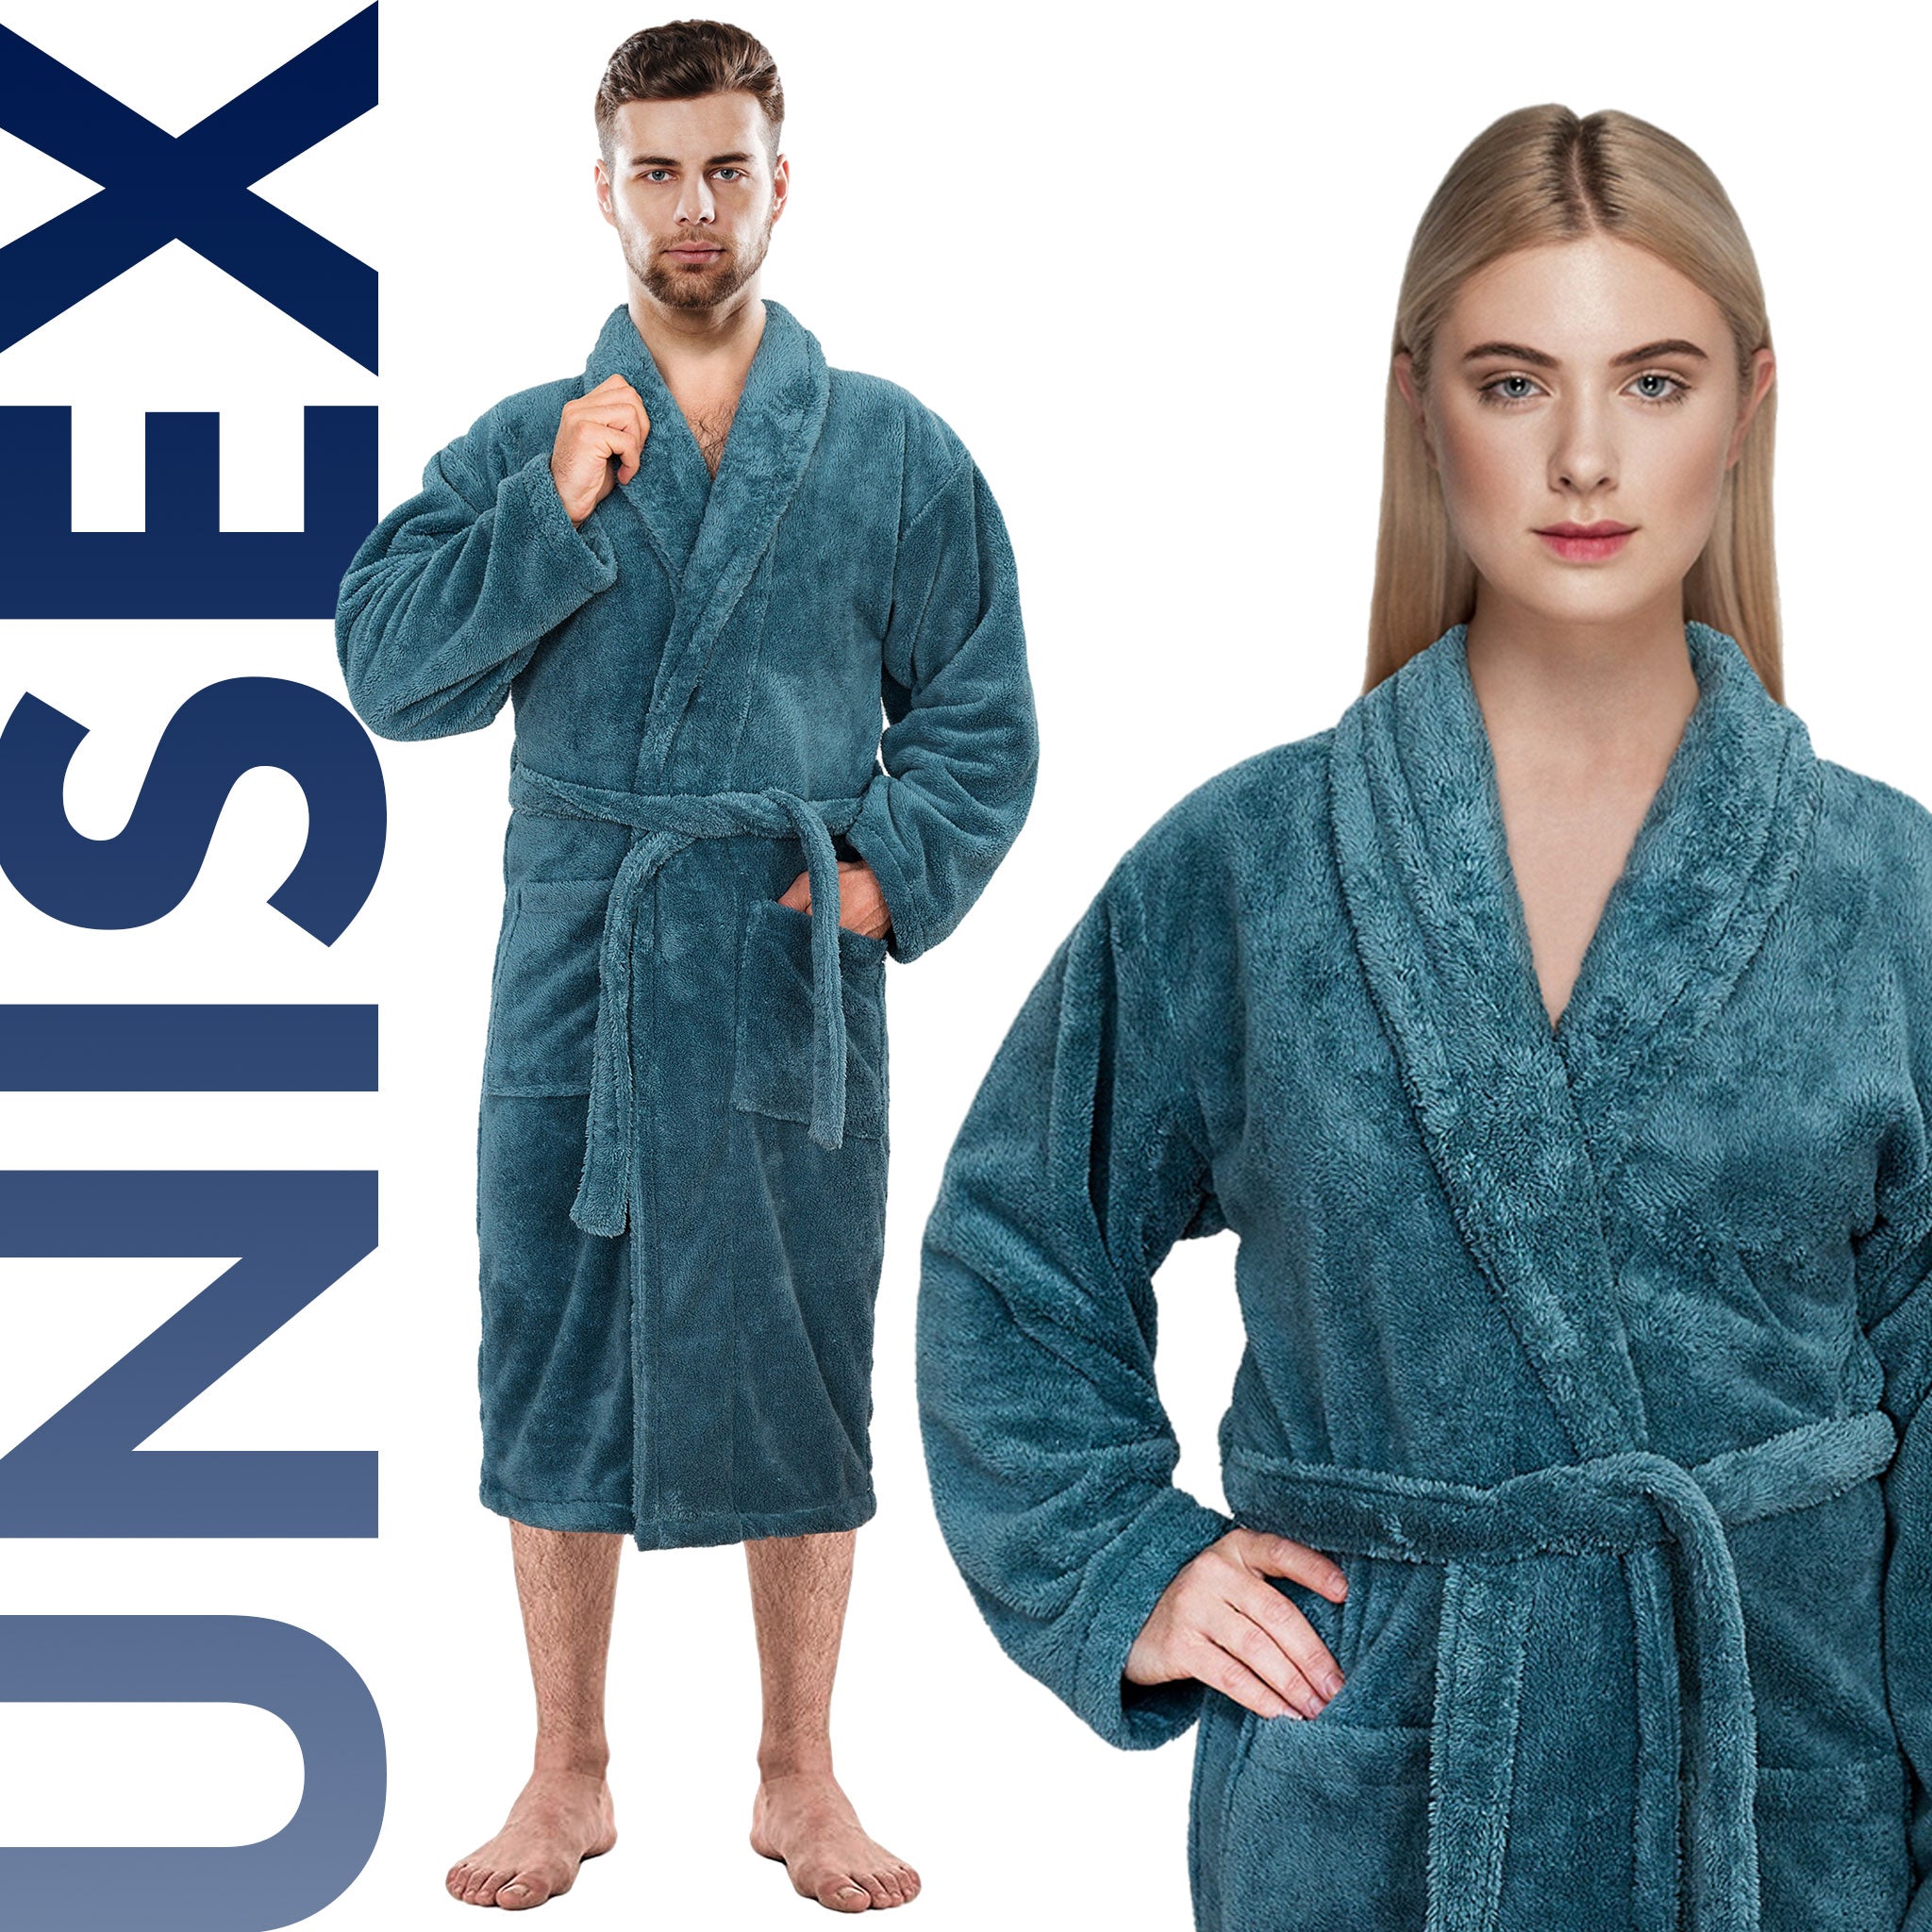 American Soft Linen Mens and Womens Robes Warm Fleece Cozy Unisex